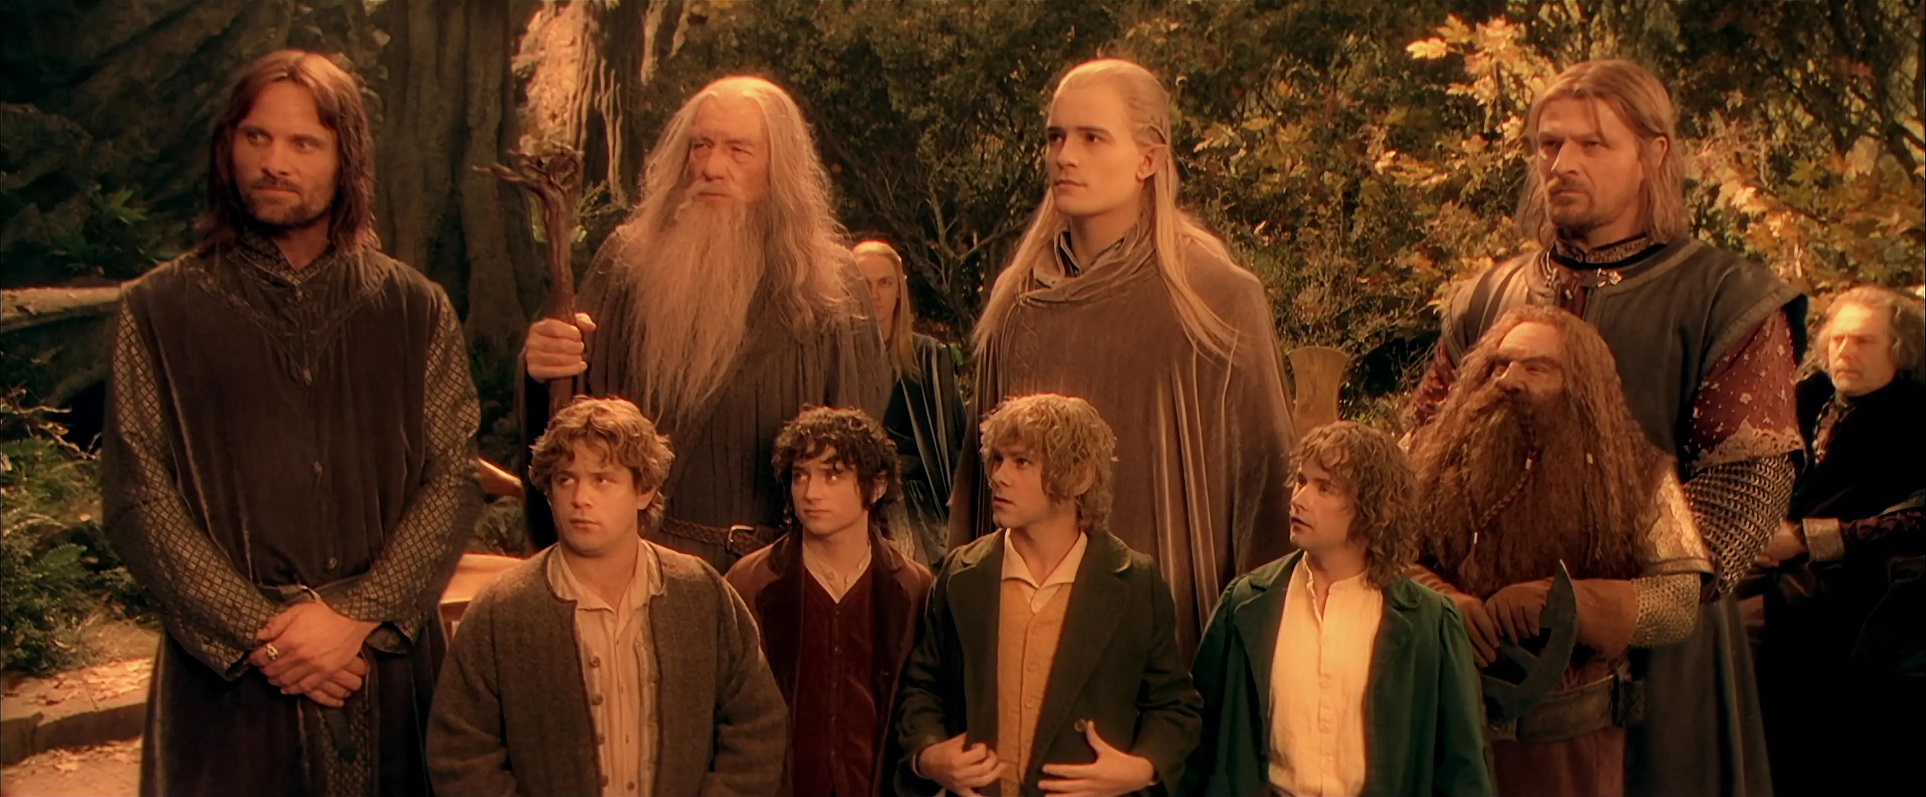 Image result for the lord of the rings the fellowship of the ring